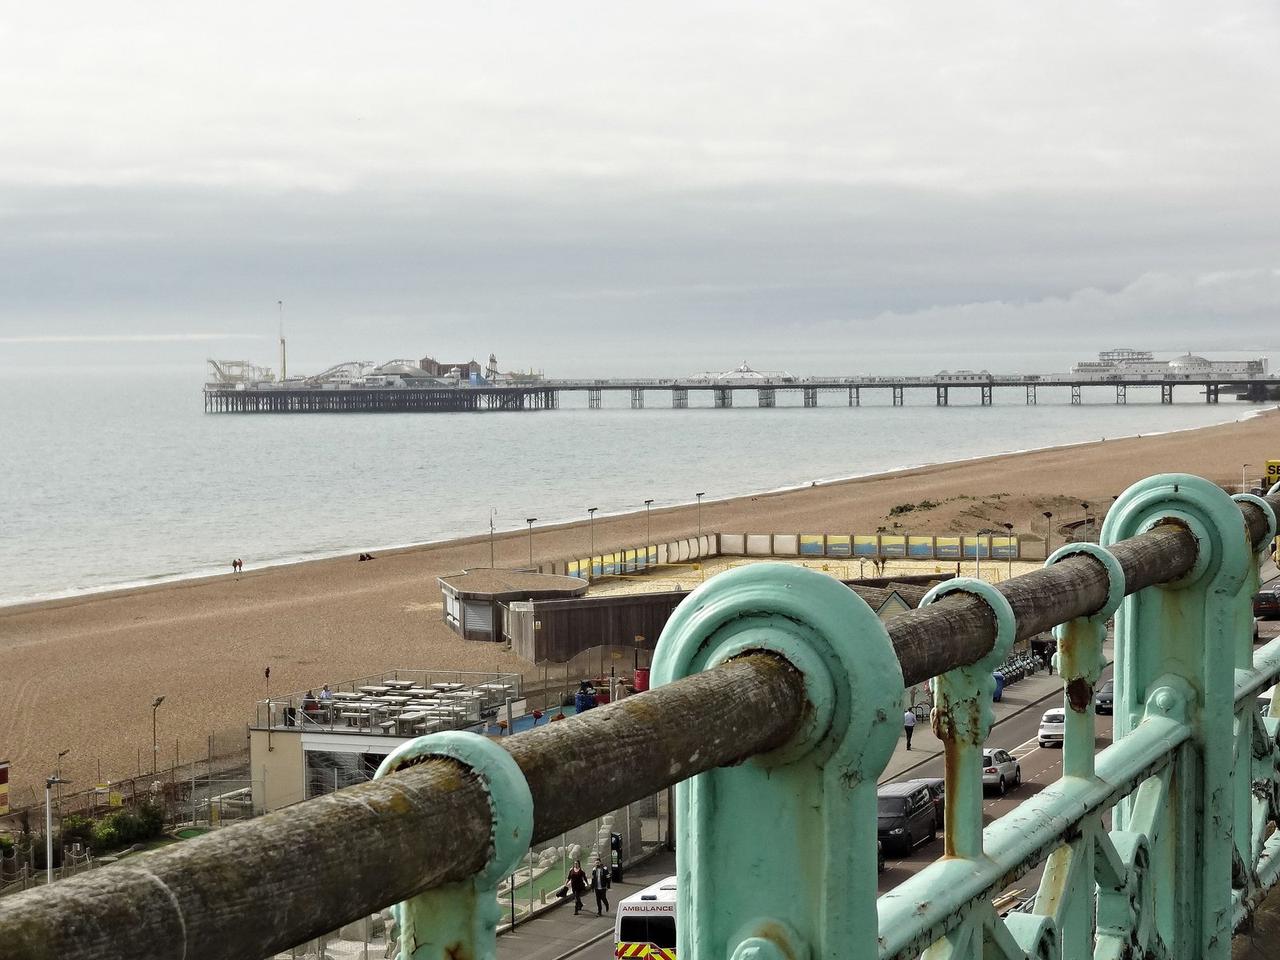 Darling-by-the-Seaside, Brighton & Hove Images - 20